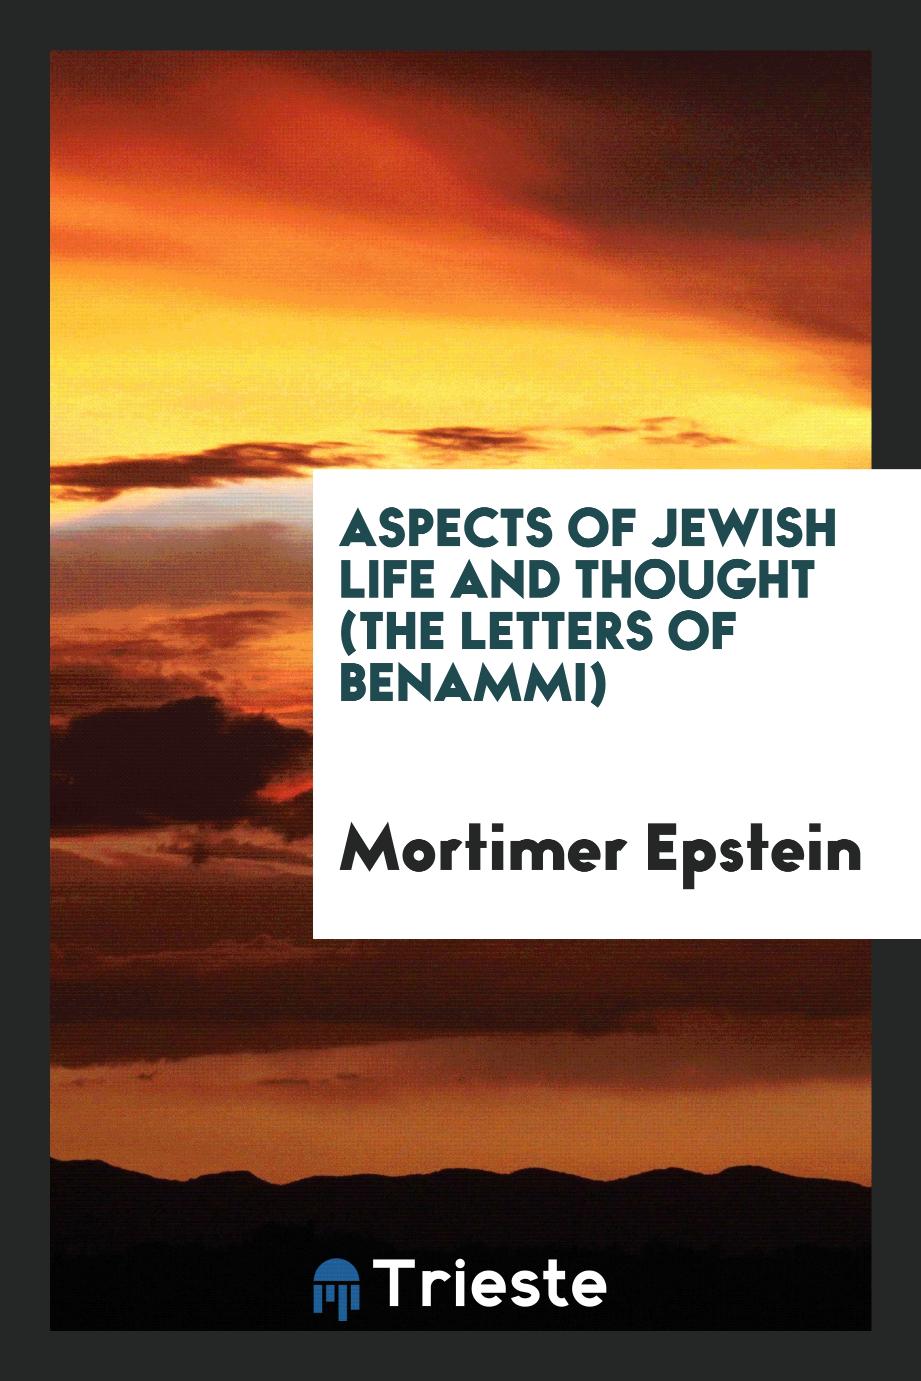 Aspects of Jewish life and thought (The letters of Benammi)